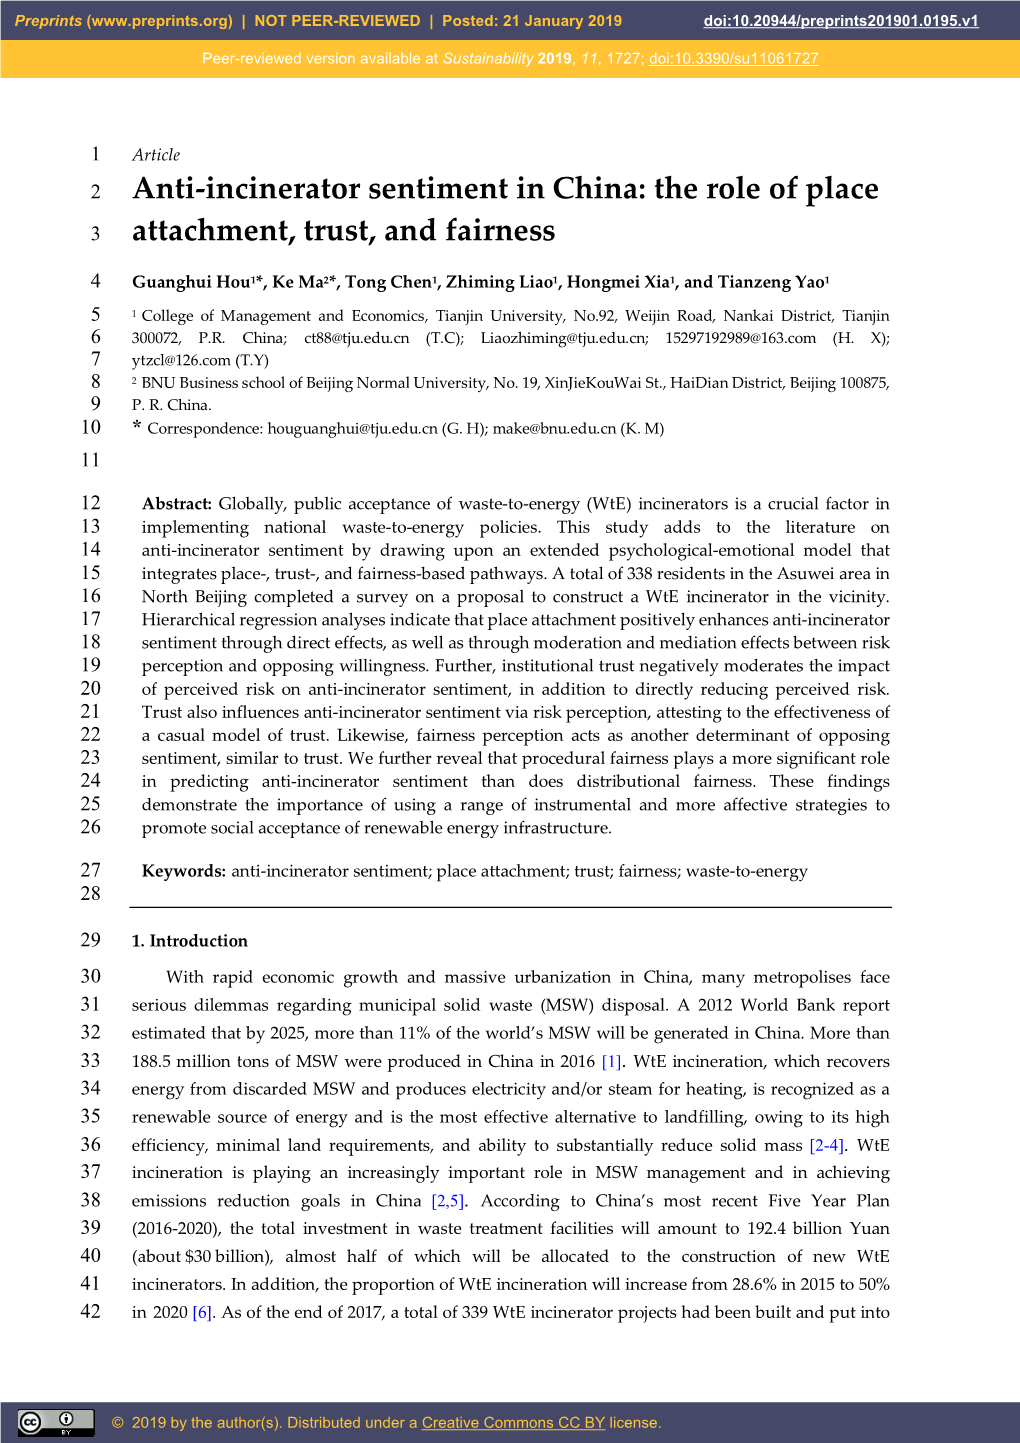 Anti-Incinerator Sentiment in China: the Role of Place 3 Attachment, Trust, and Fairness